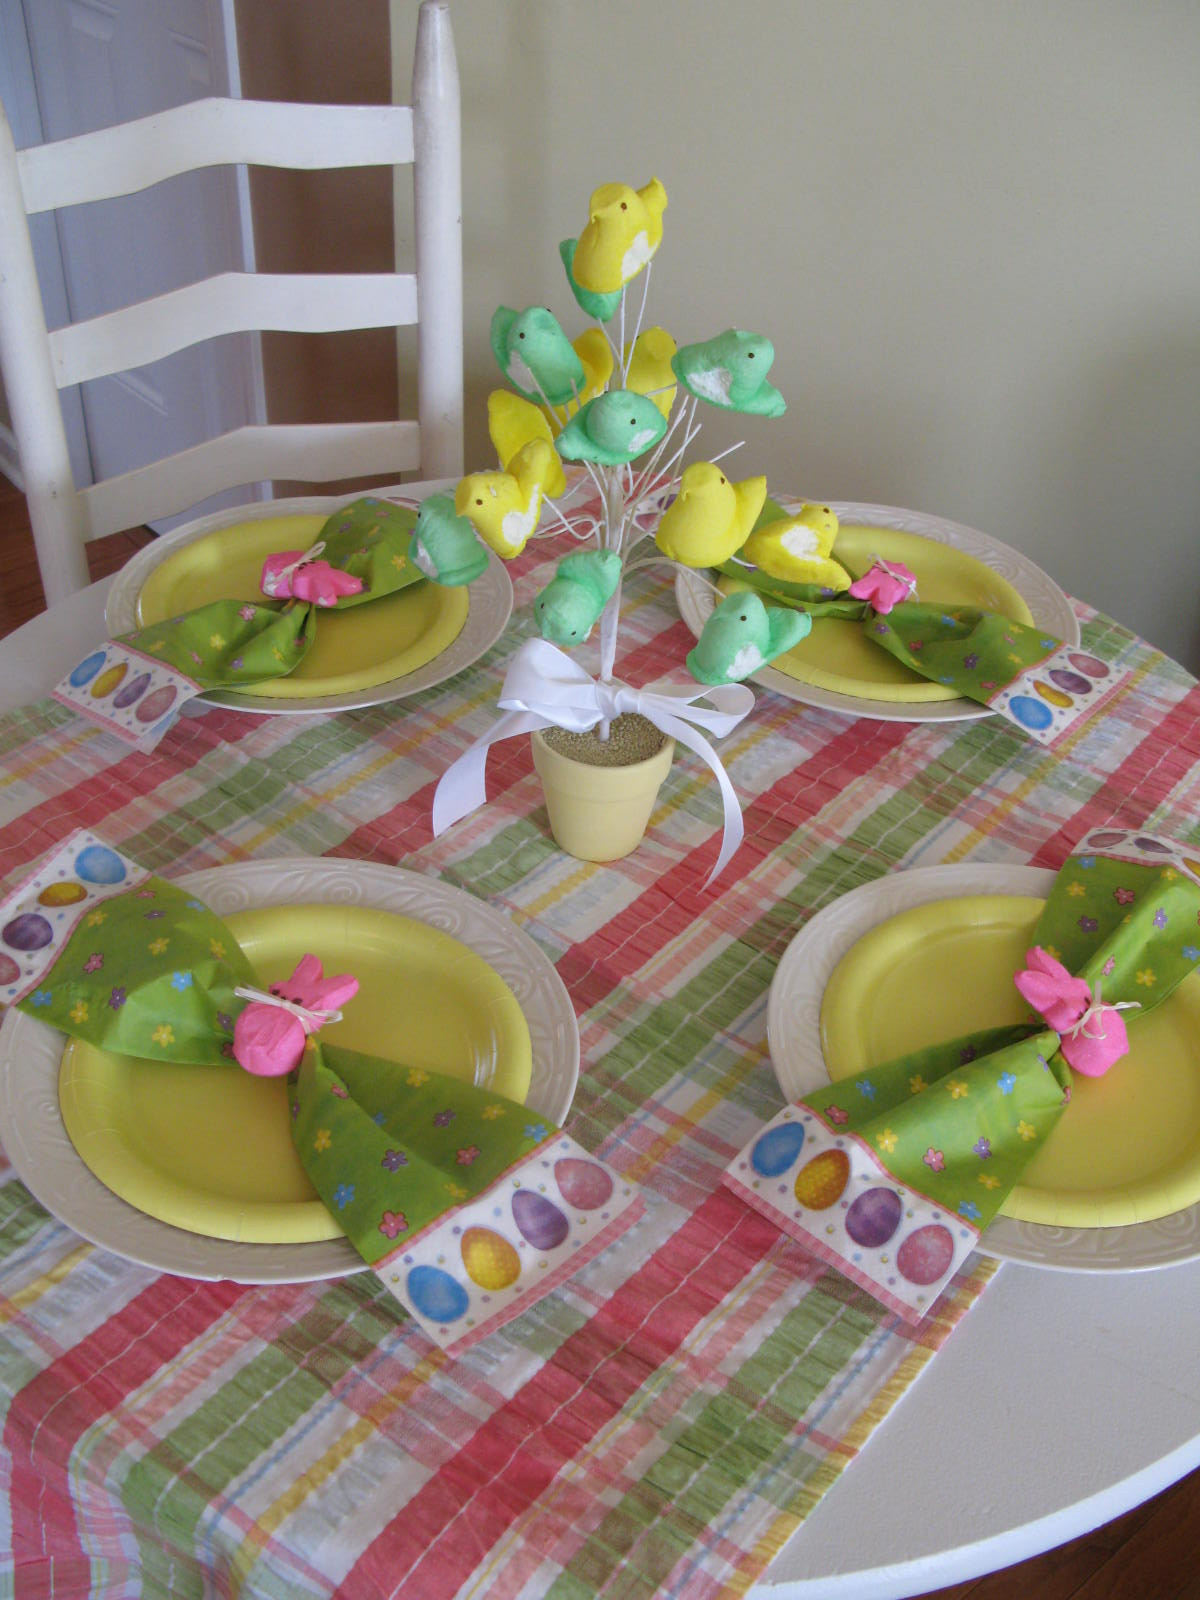 Easter Table Setting Ideas
 Roundabout $10 Easter table setting